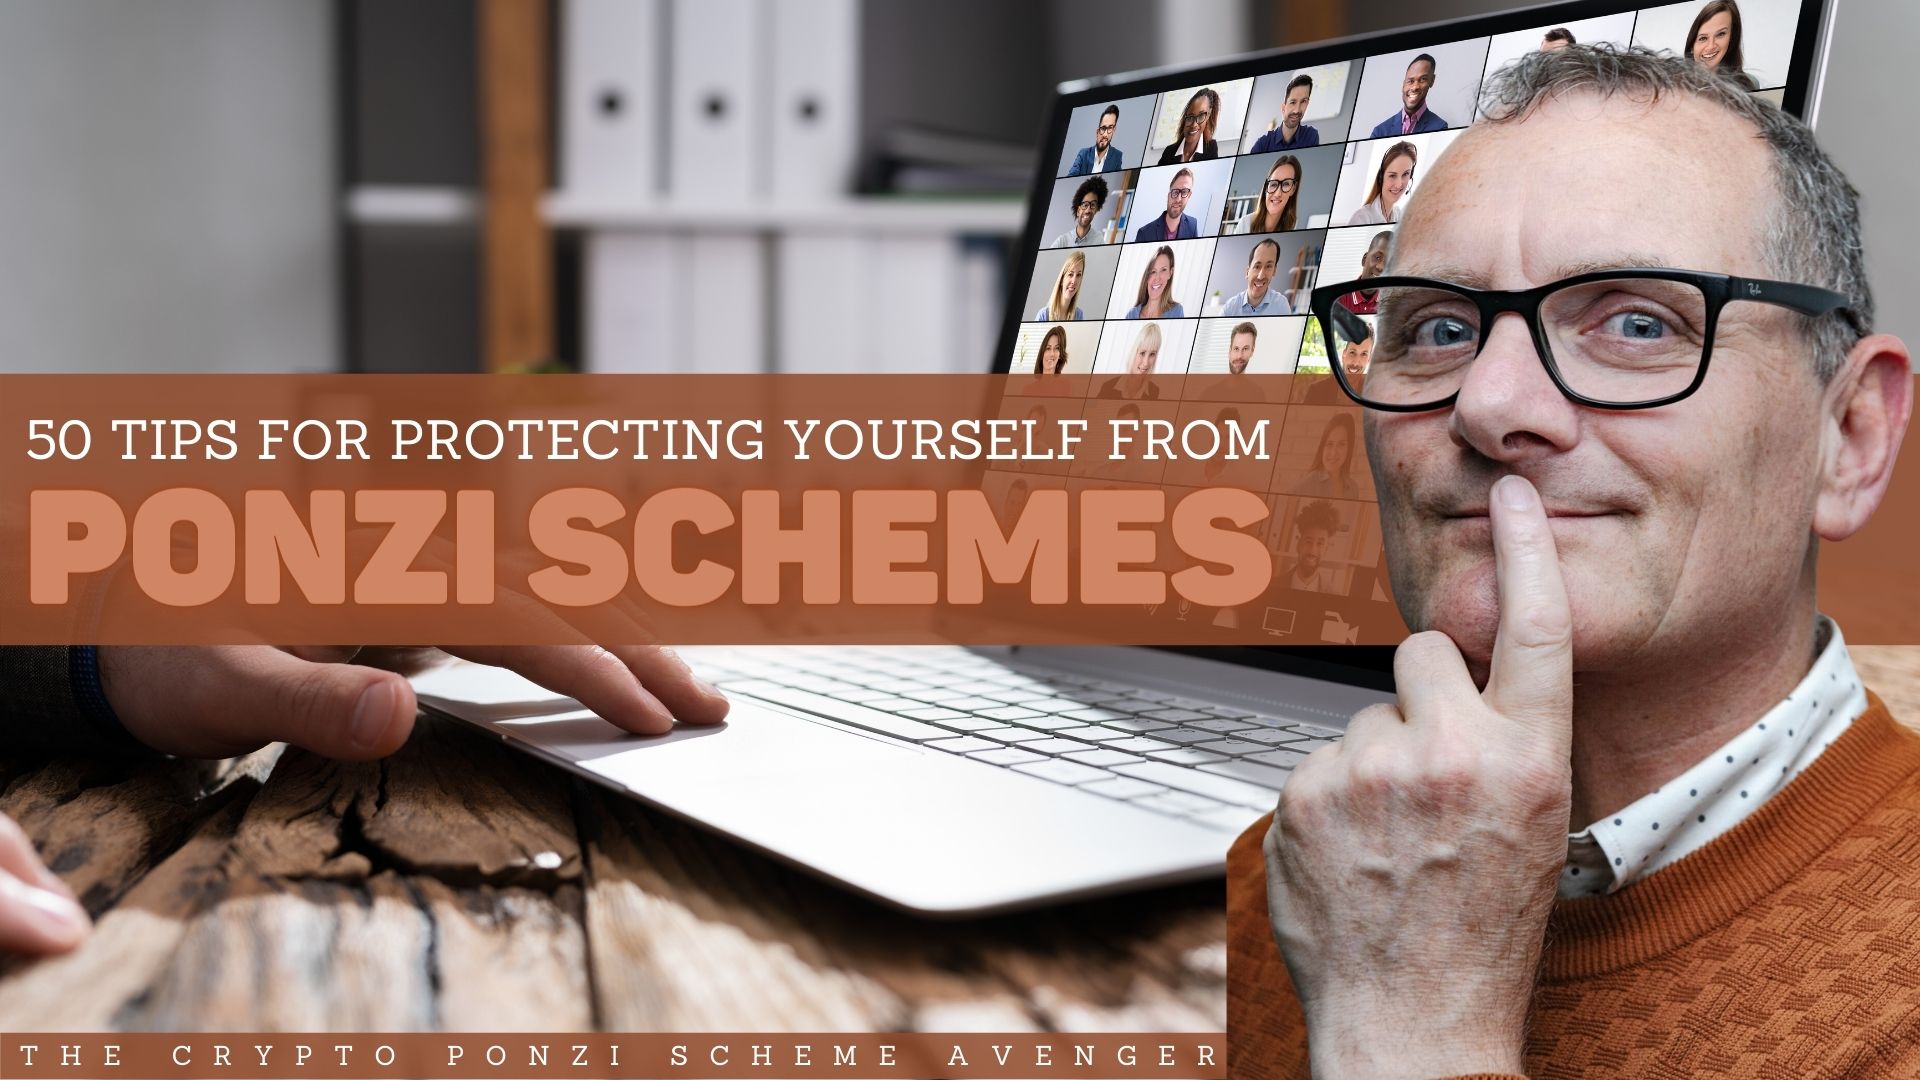 50 Tips for Protecting Yourself from Ponzi Scheme